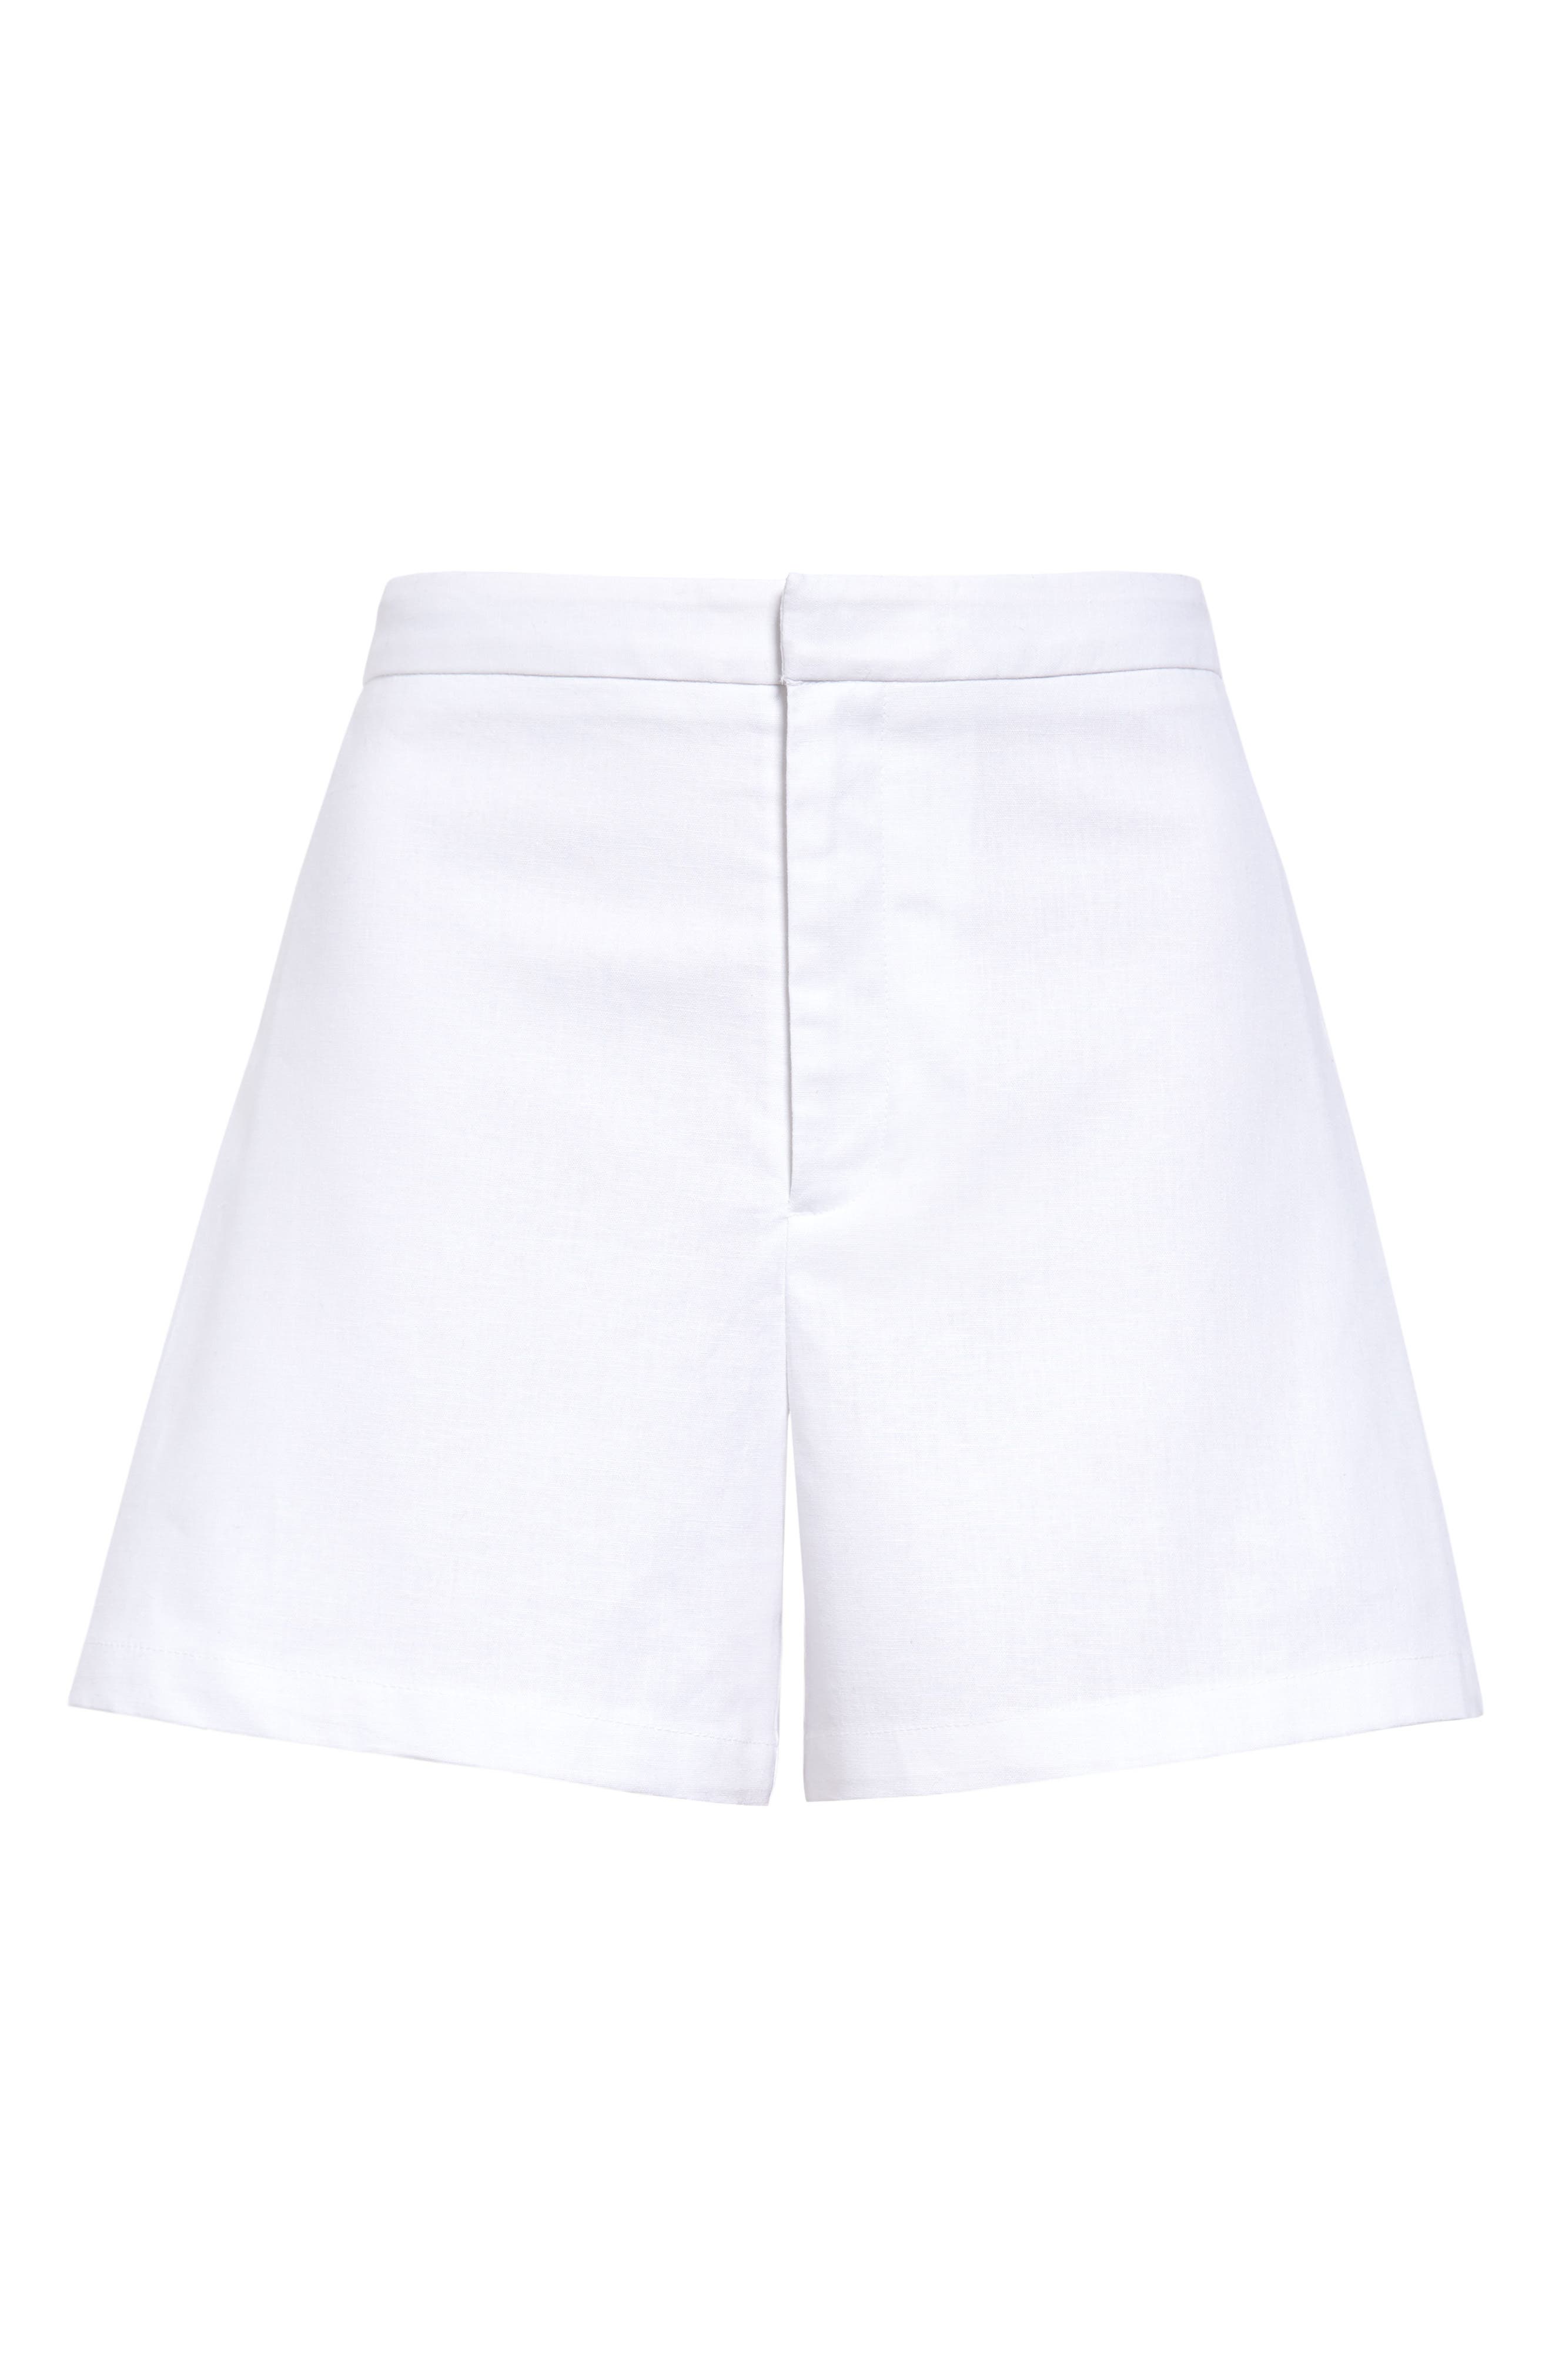 black and white womens shorts